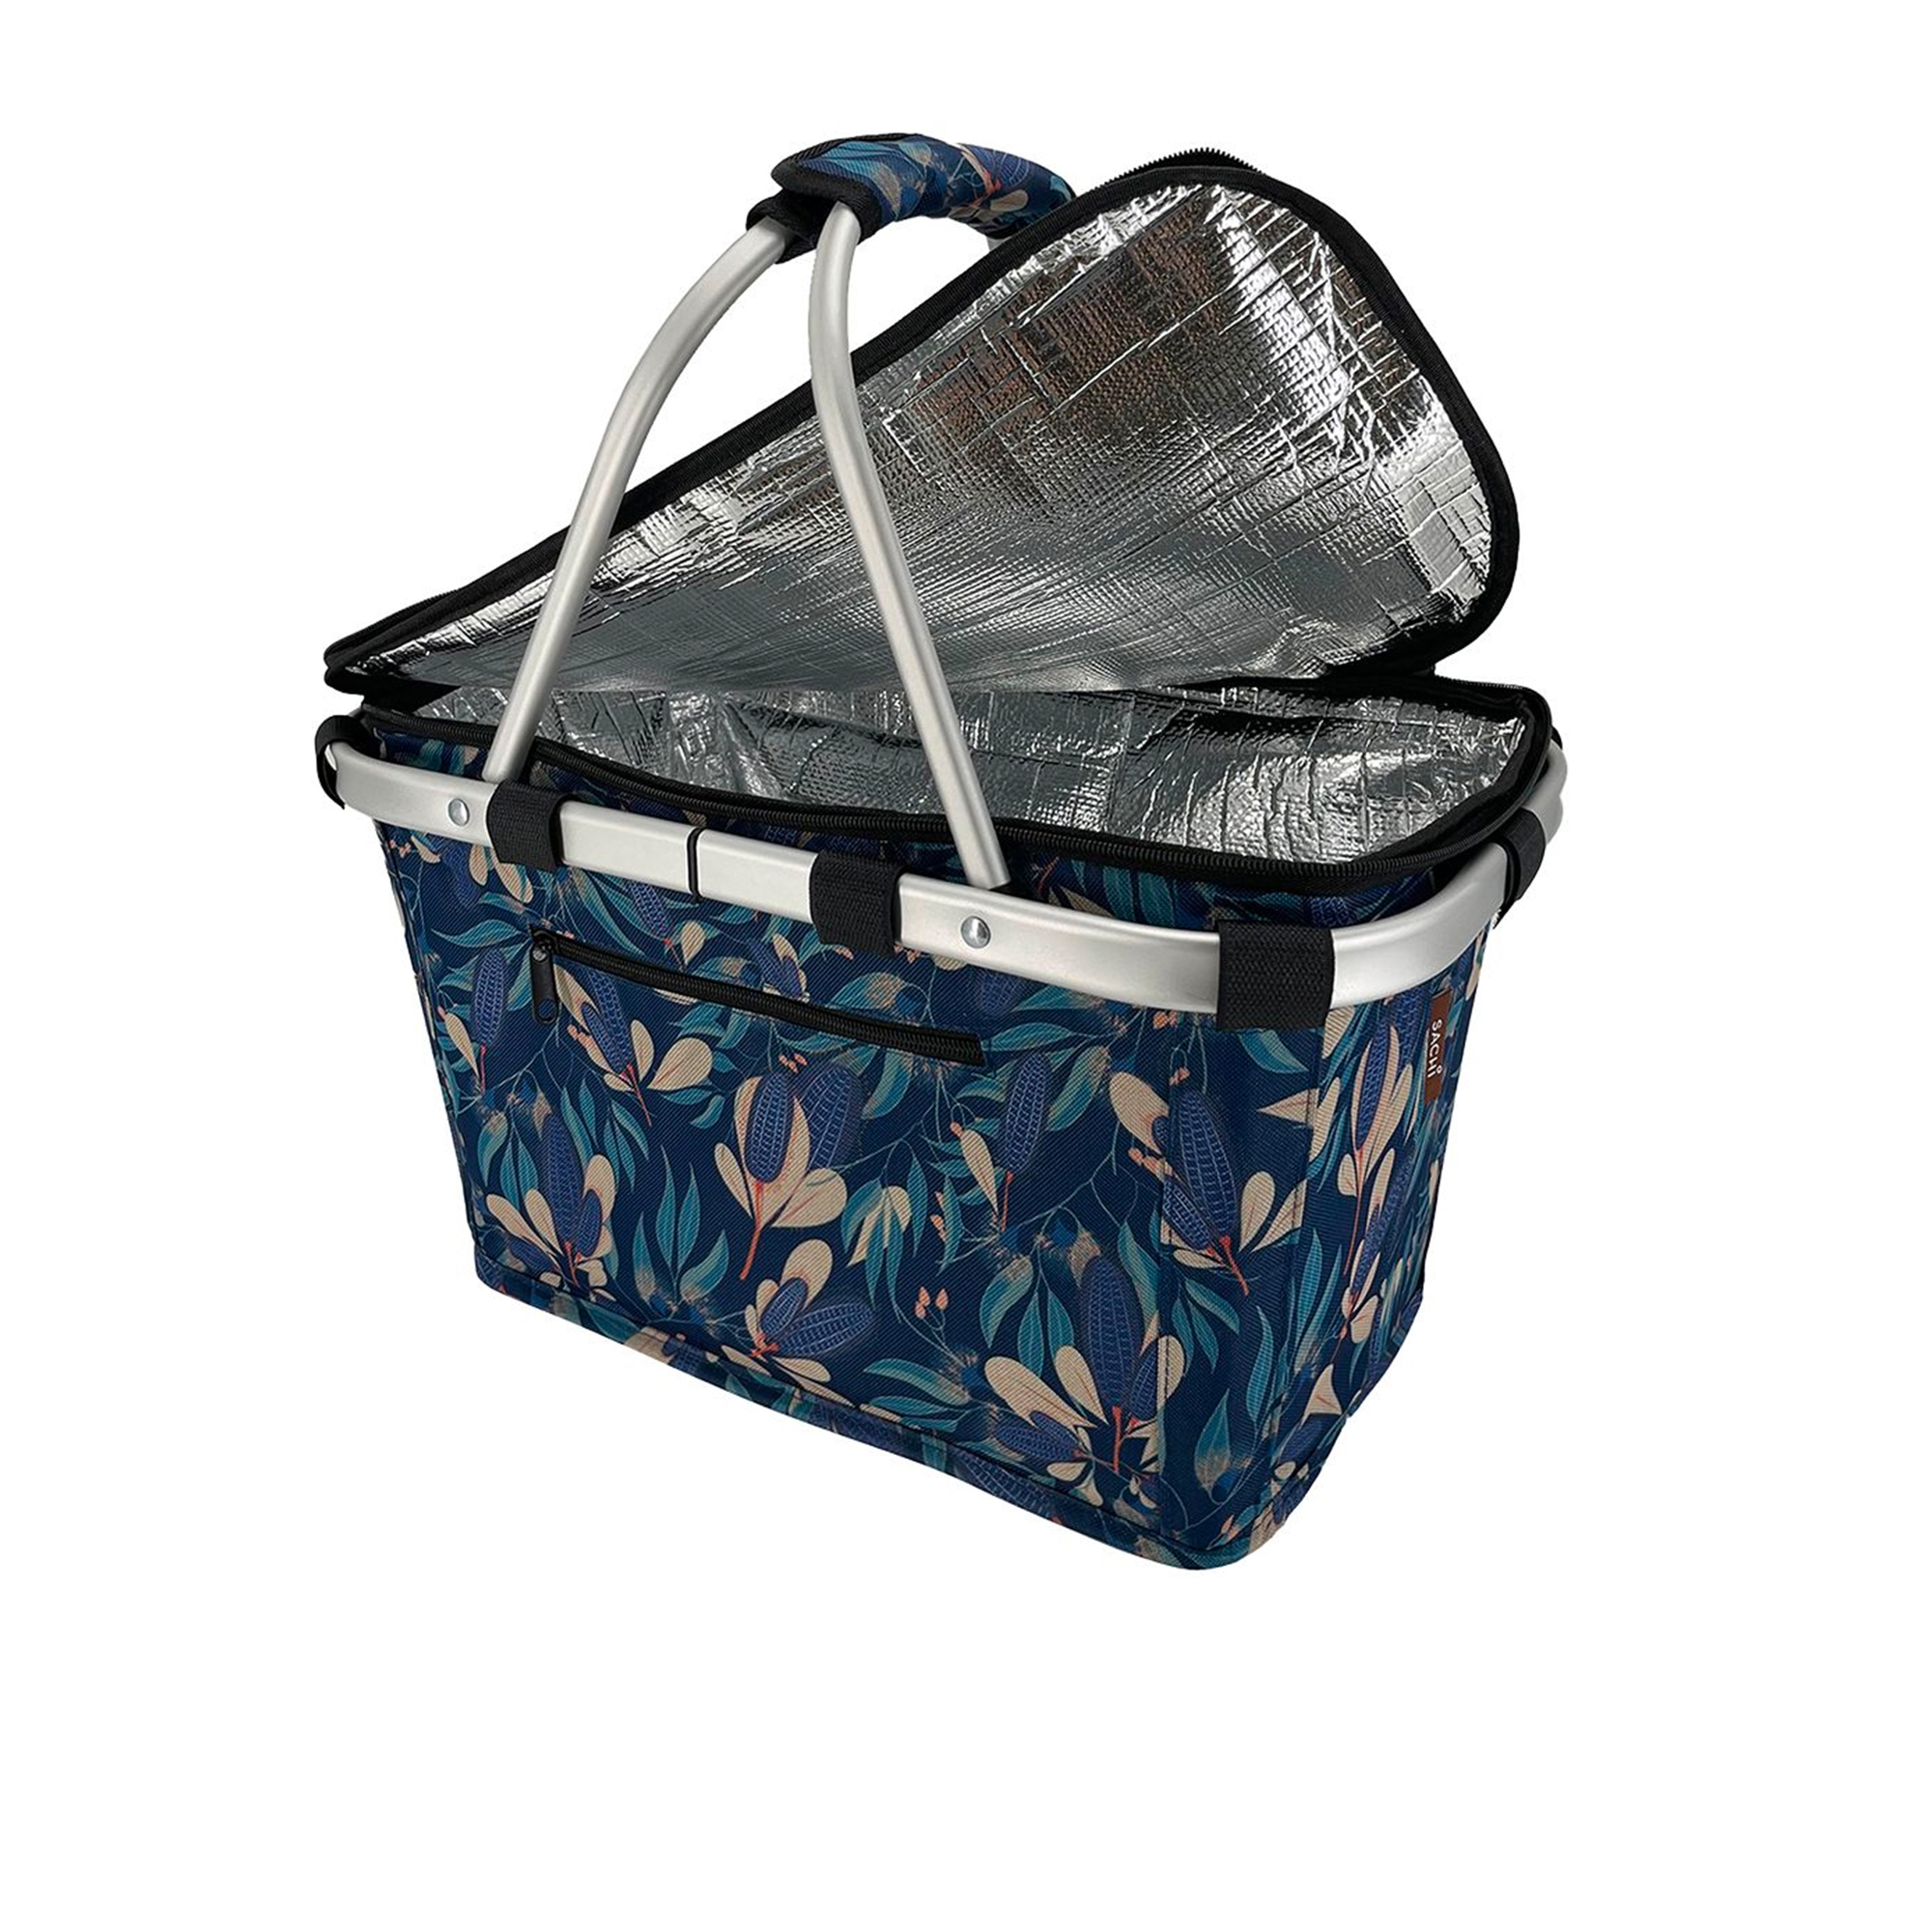 Sachi Insulated Carry Basket with Lid Native Bushland Image 1